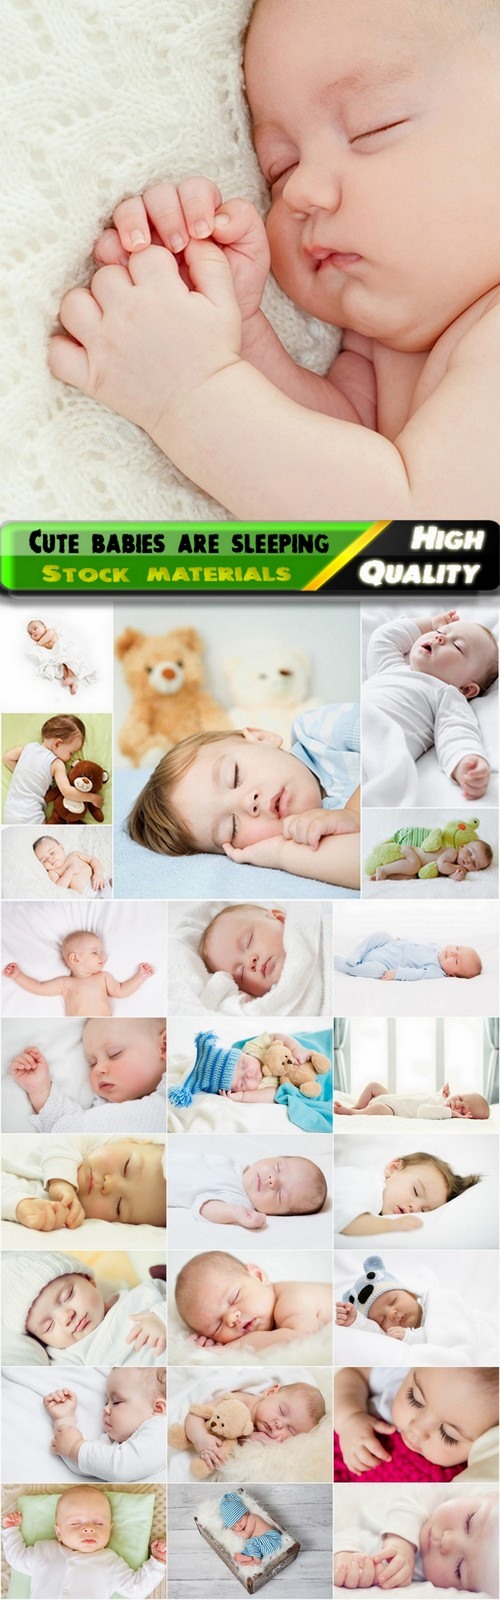 Cute babies are sleeping Stock images - 25 HQ Jpg